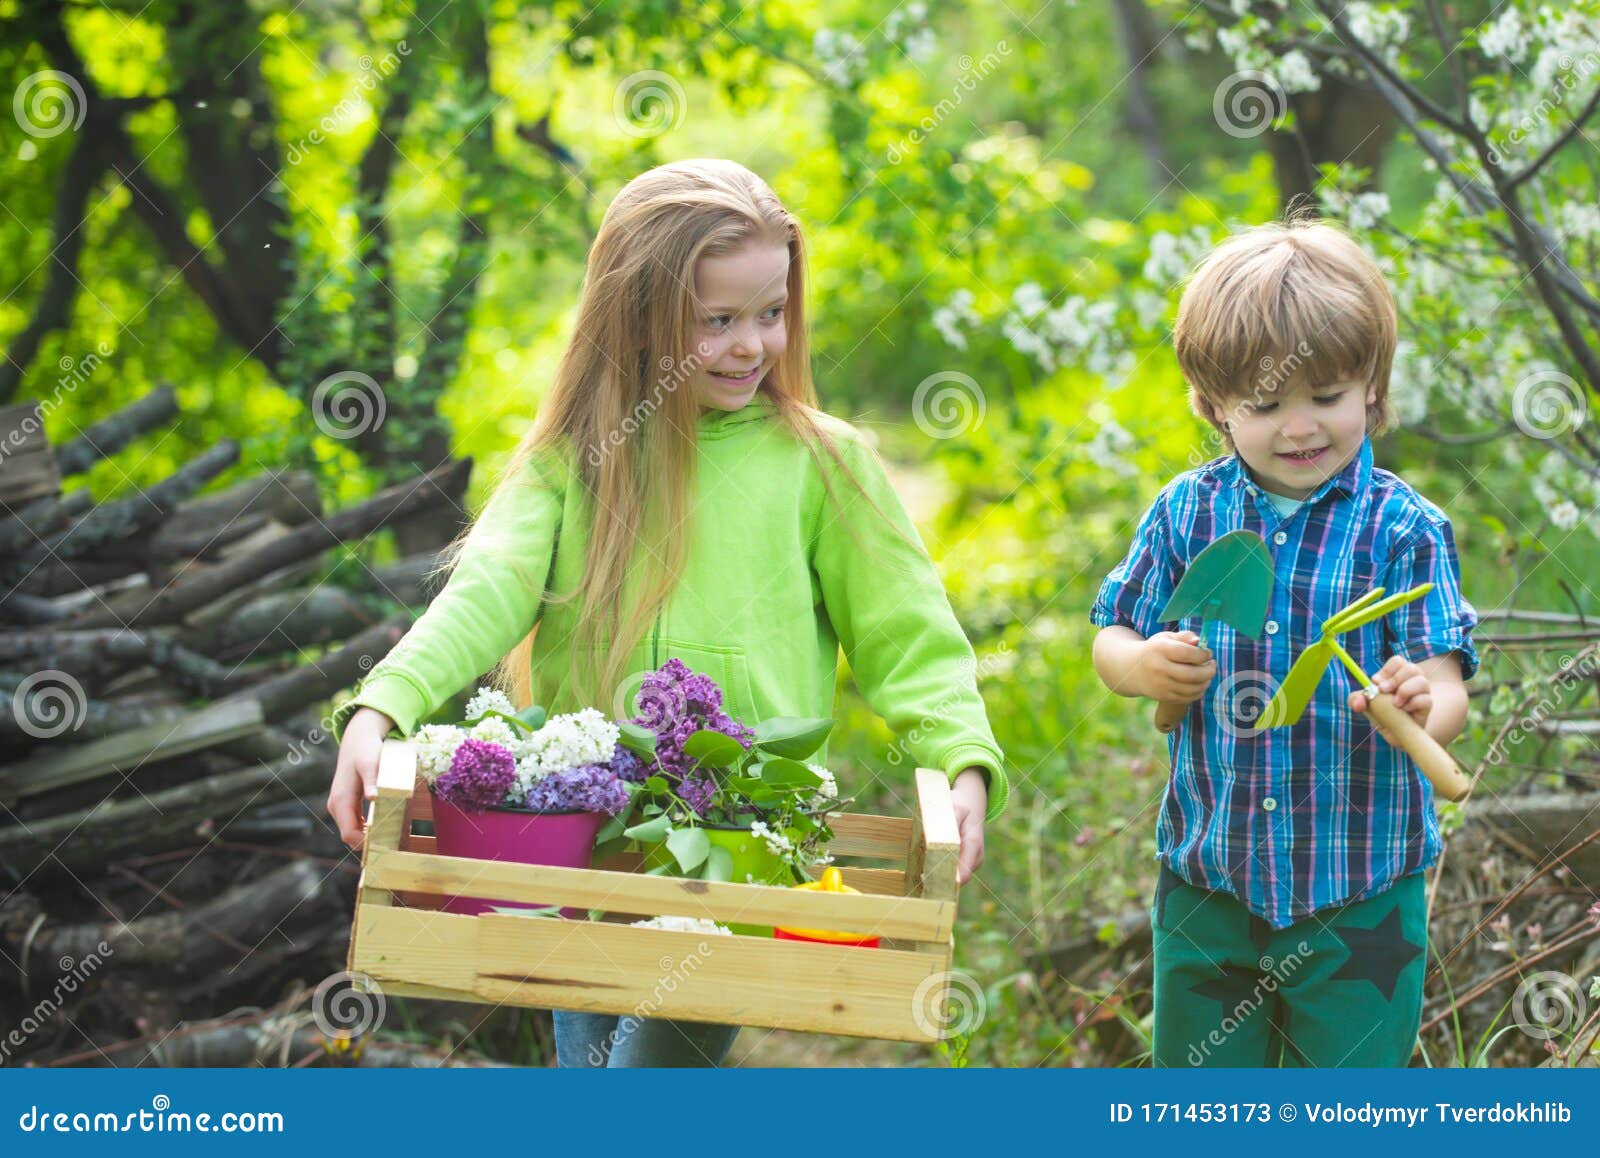 Countryside Childhood. Young Generation Tree Huggers and Nature Lovers. Childchood and Leisure Concept. Cute Stock Image Image of lilac: 171453173